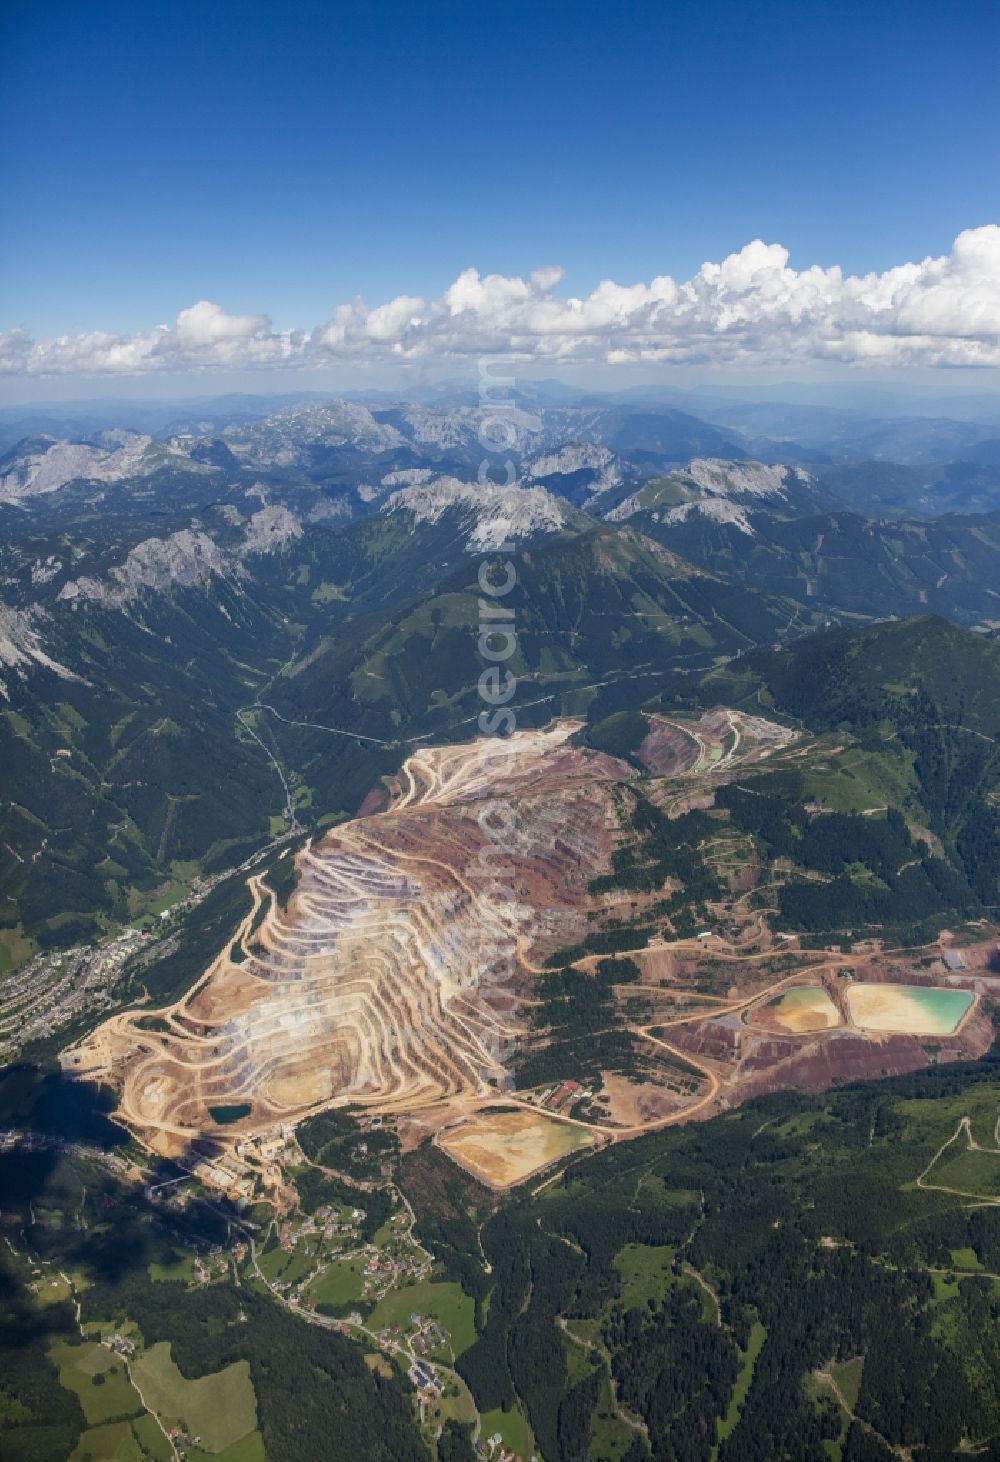 Eisenerz from the bird's eye view: Quarry for the mining and handling of iron ore in Eisenerz in Steiermark, Austria